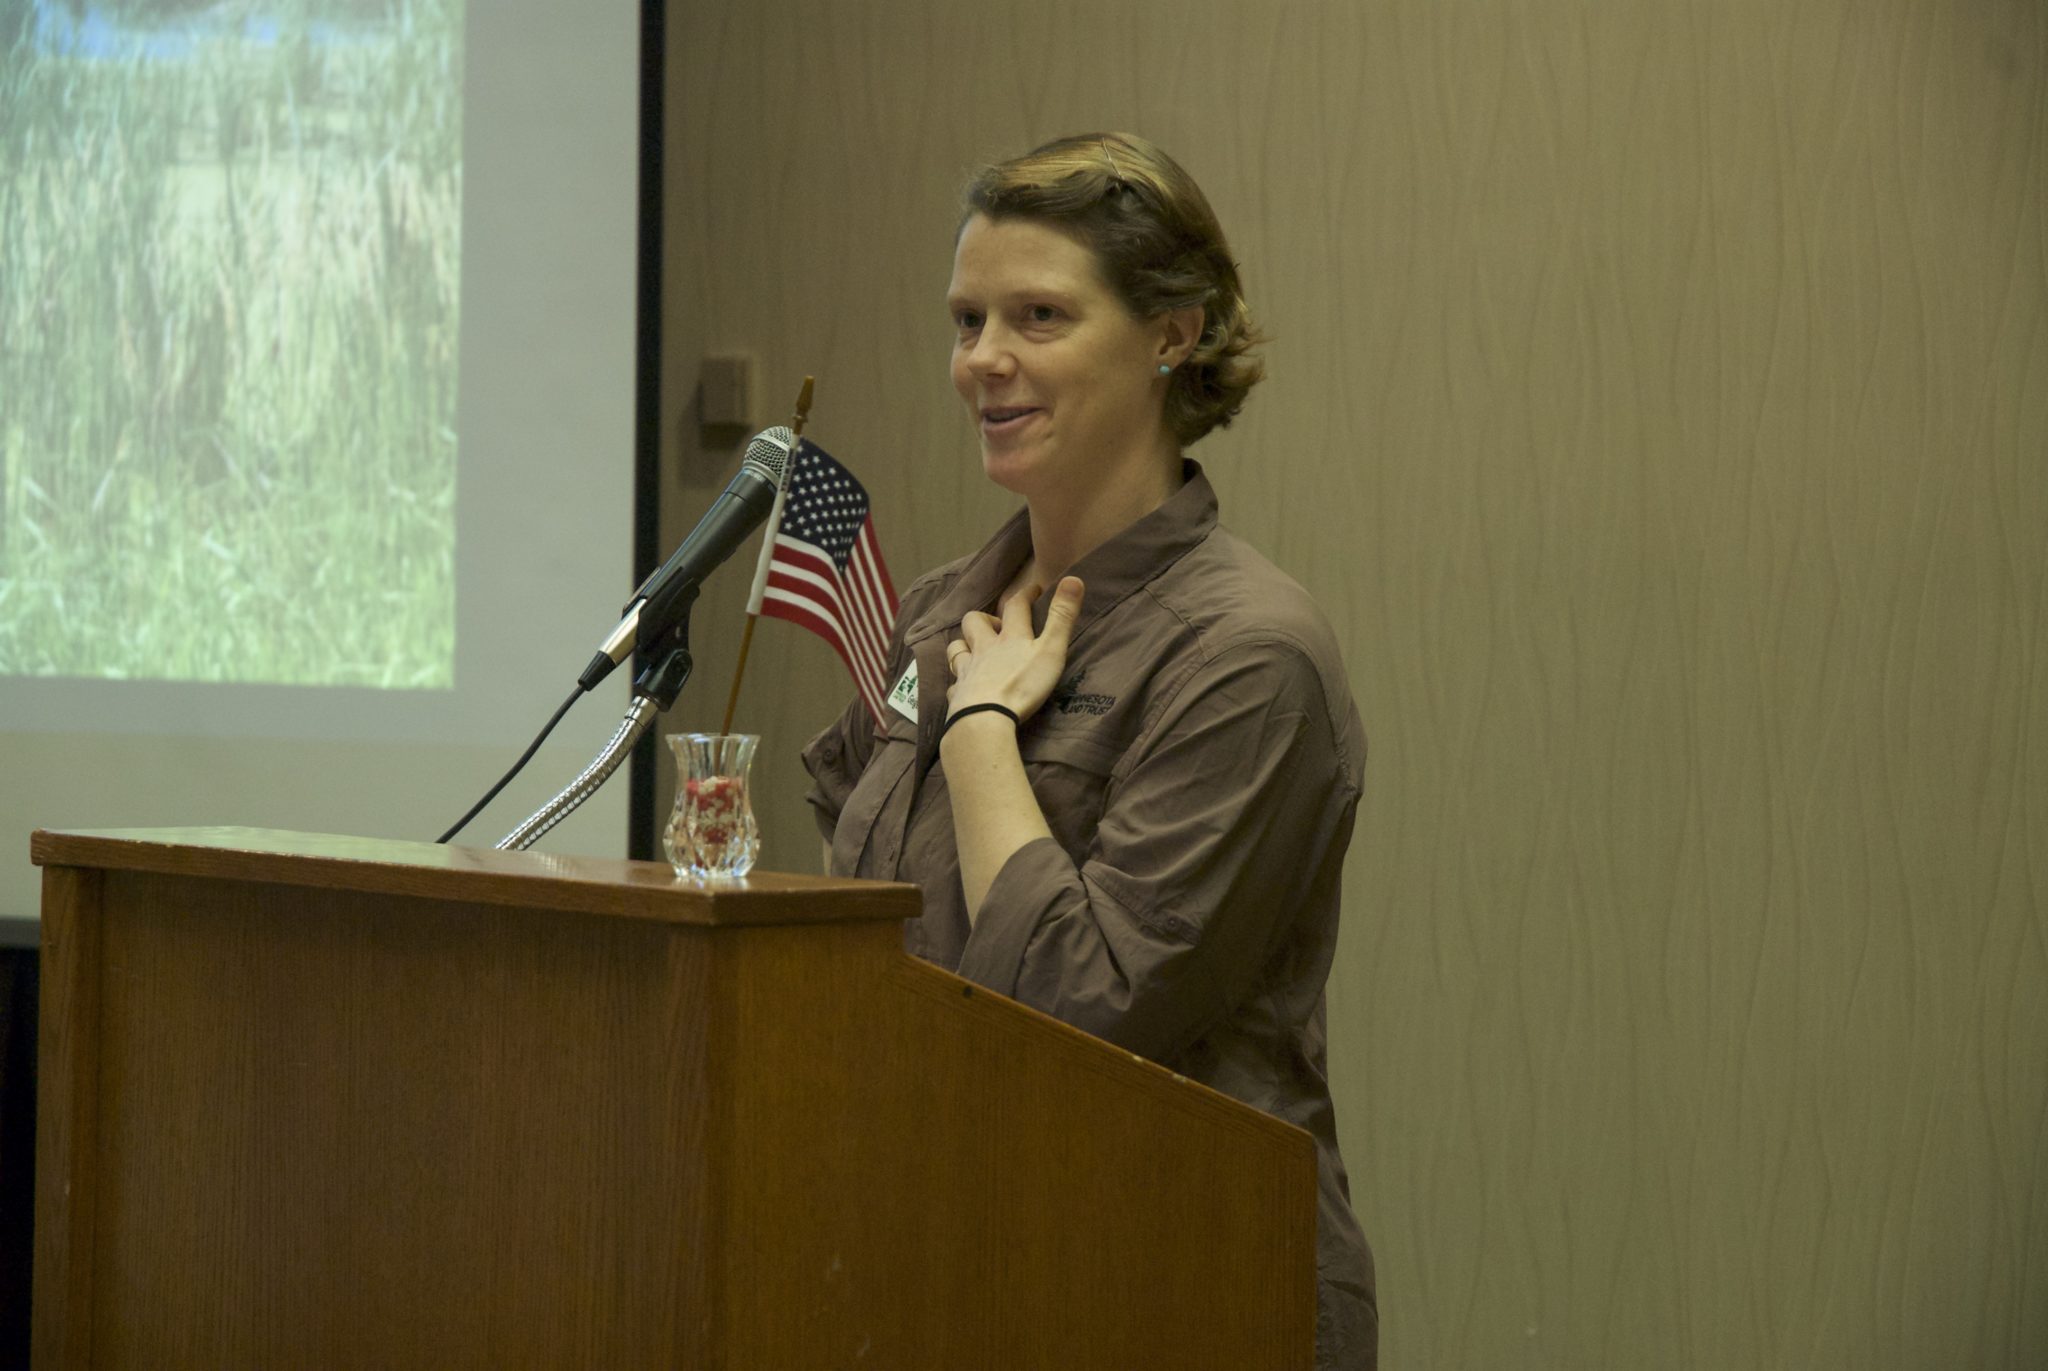 Kristina Geiger speaking at the Treasured Places event